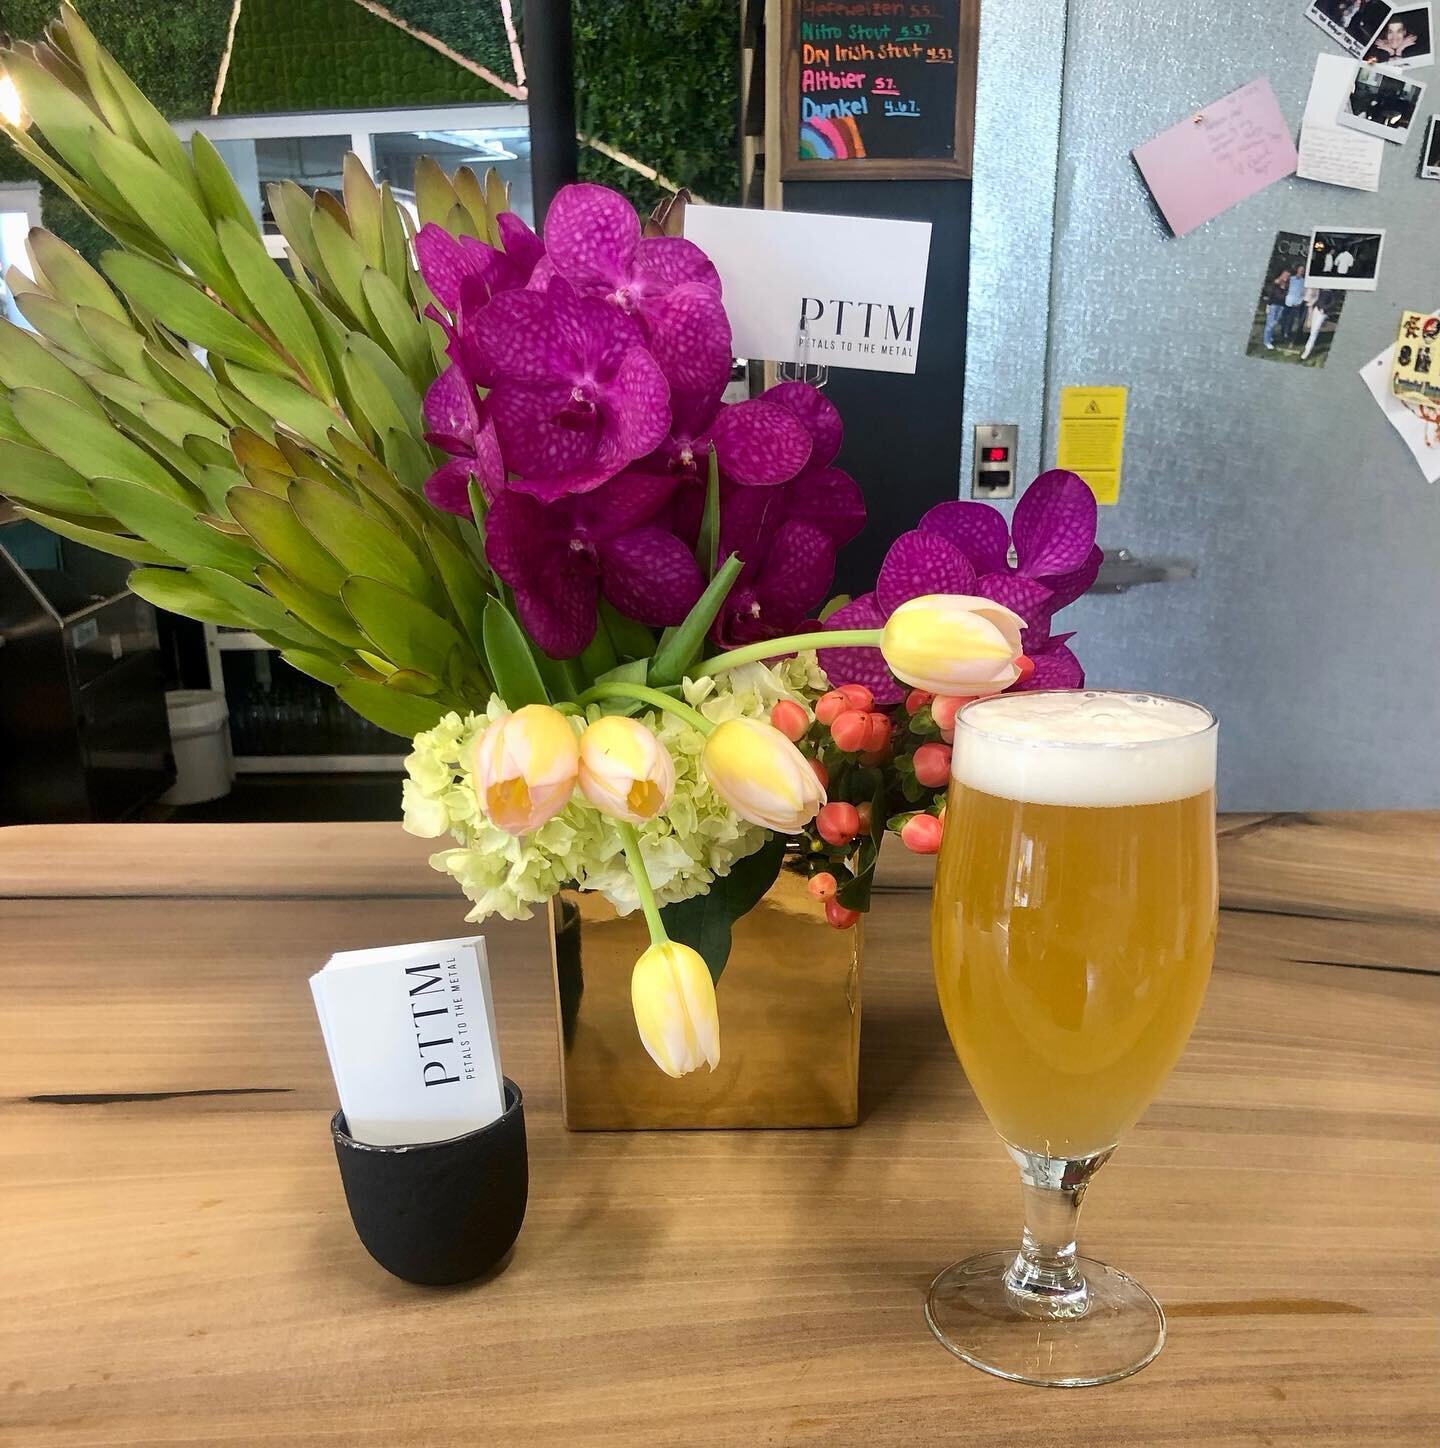 Beautiful day inside &amp; out here at BabyCat! We&rsquo;ve got @steeze.burger &amp; @capcitytrivia here tonight!! Come check out a preview of our Mother&rsquo;s Day bouquet bar - these gorgeous blooms by @petalstothemetalfloristdc